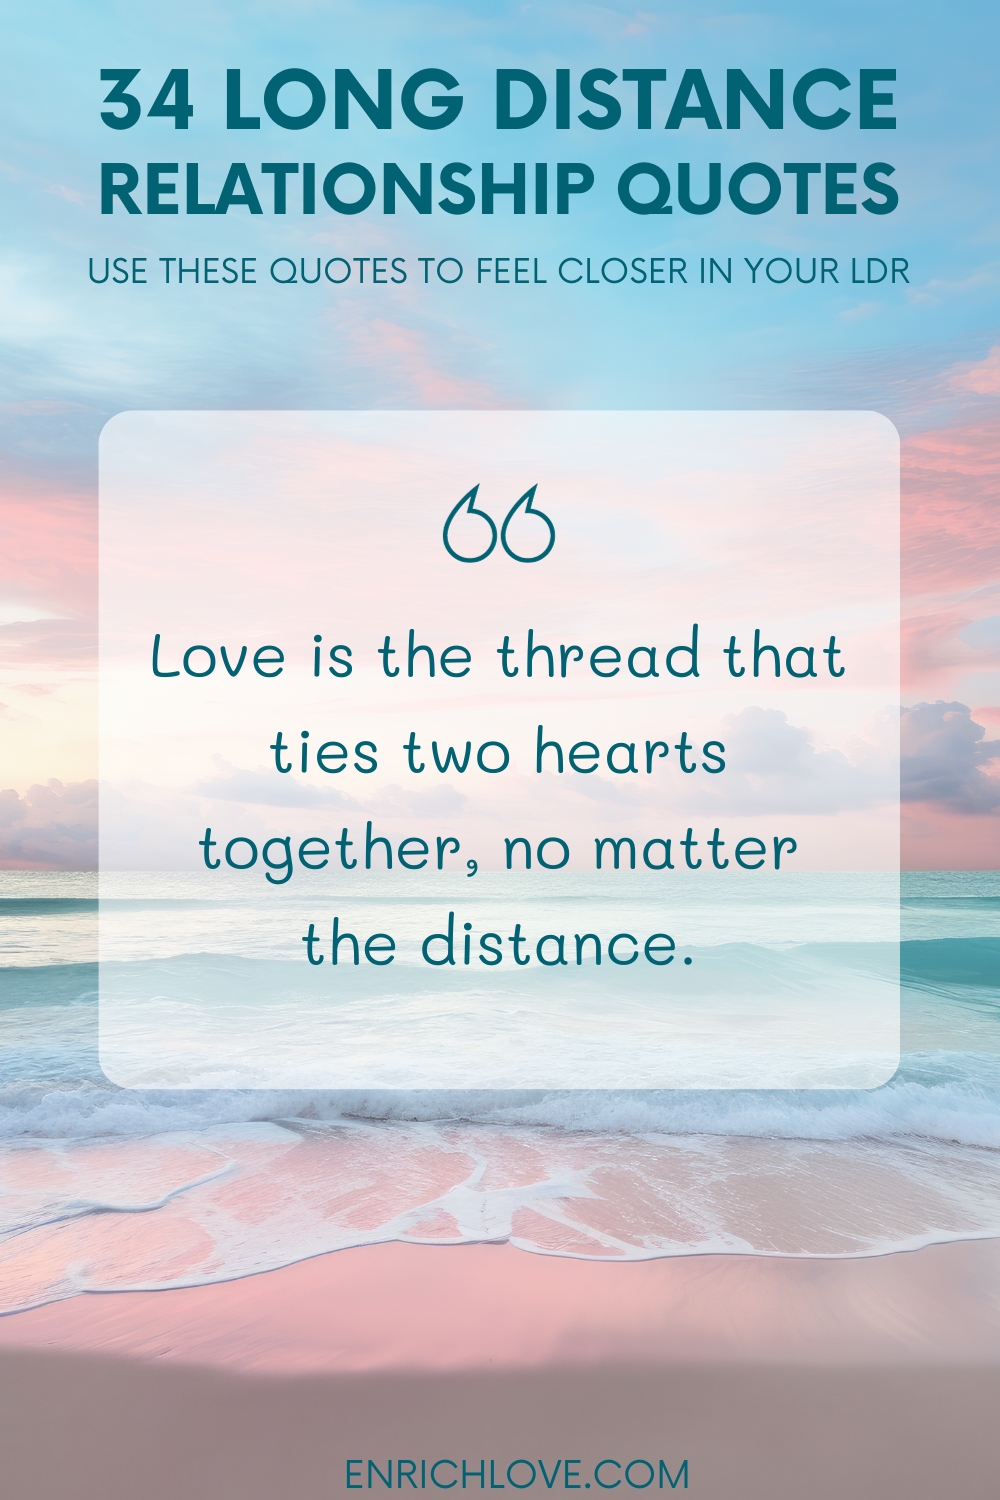 34 Long Distance Relationship Quotes - Love is the thread that ties two hearts together, no matter the distance.